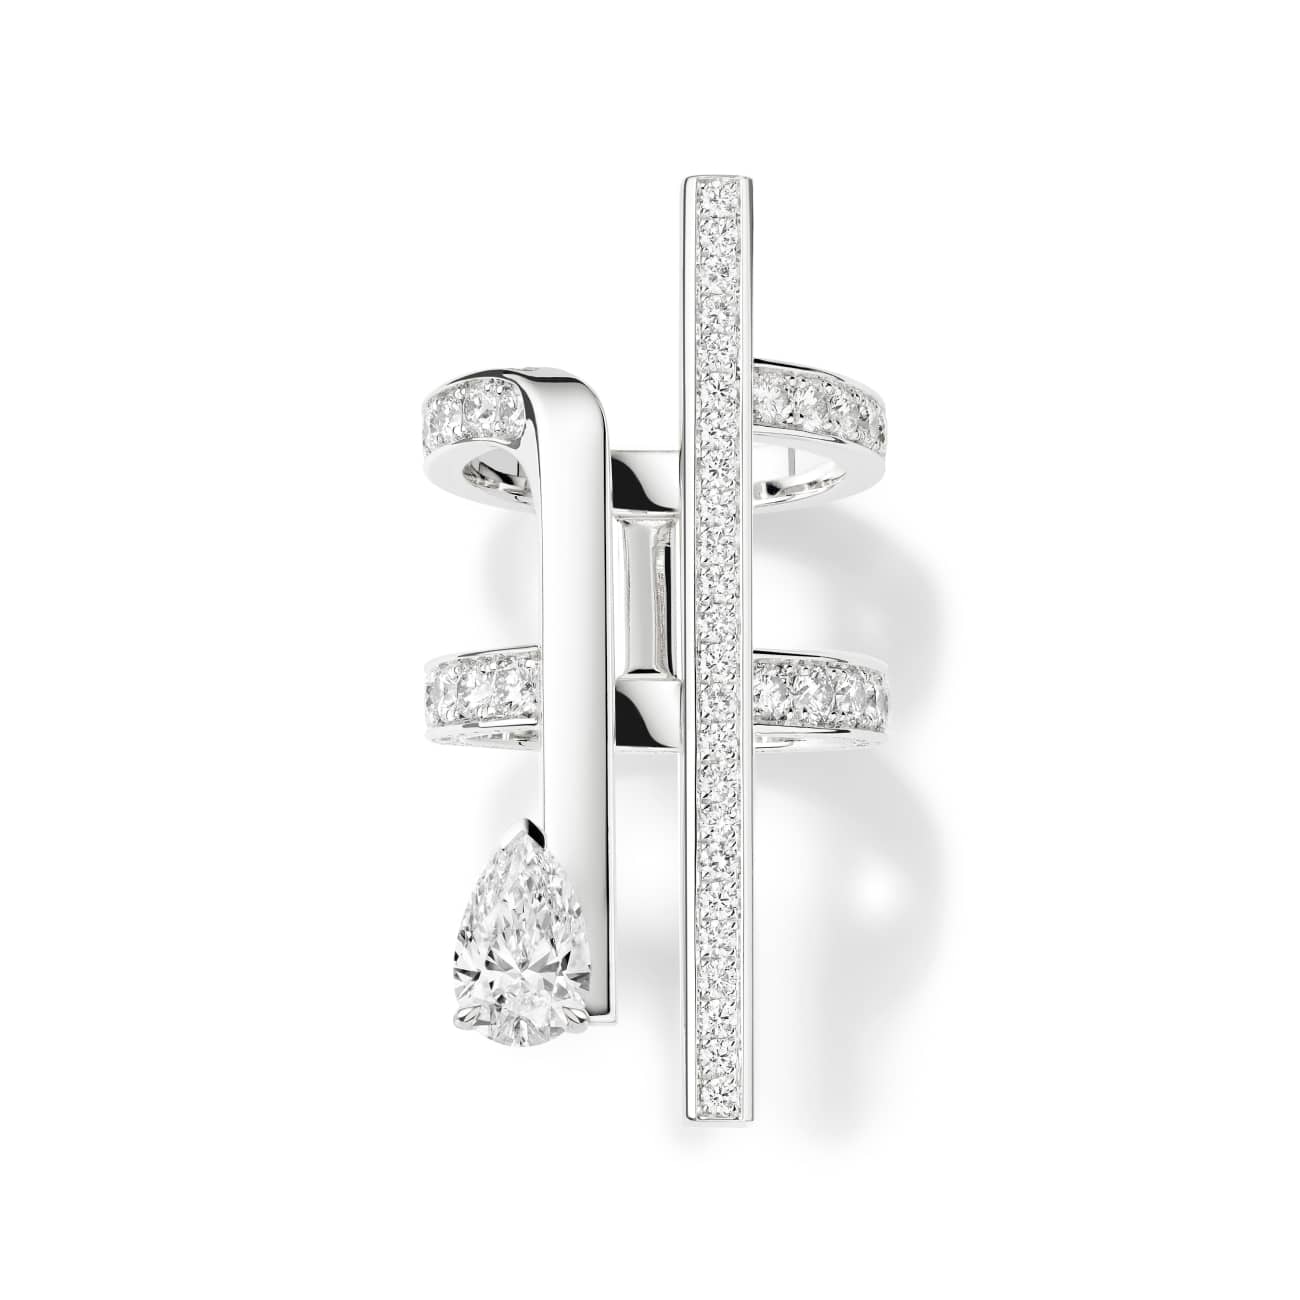 Essential Jewels: The Different Ways to Rock a Diamond Ring